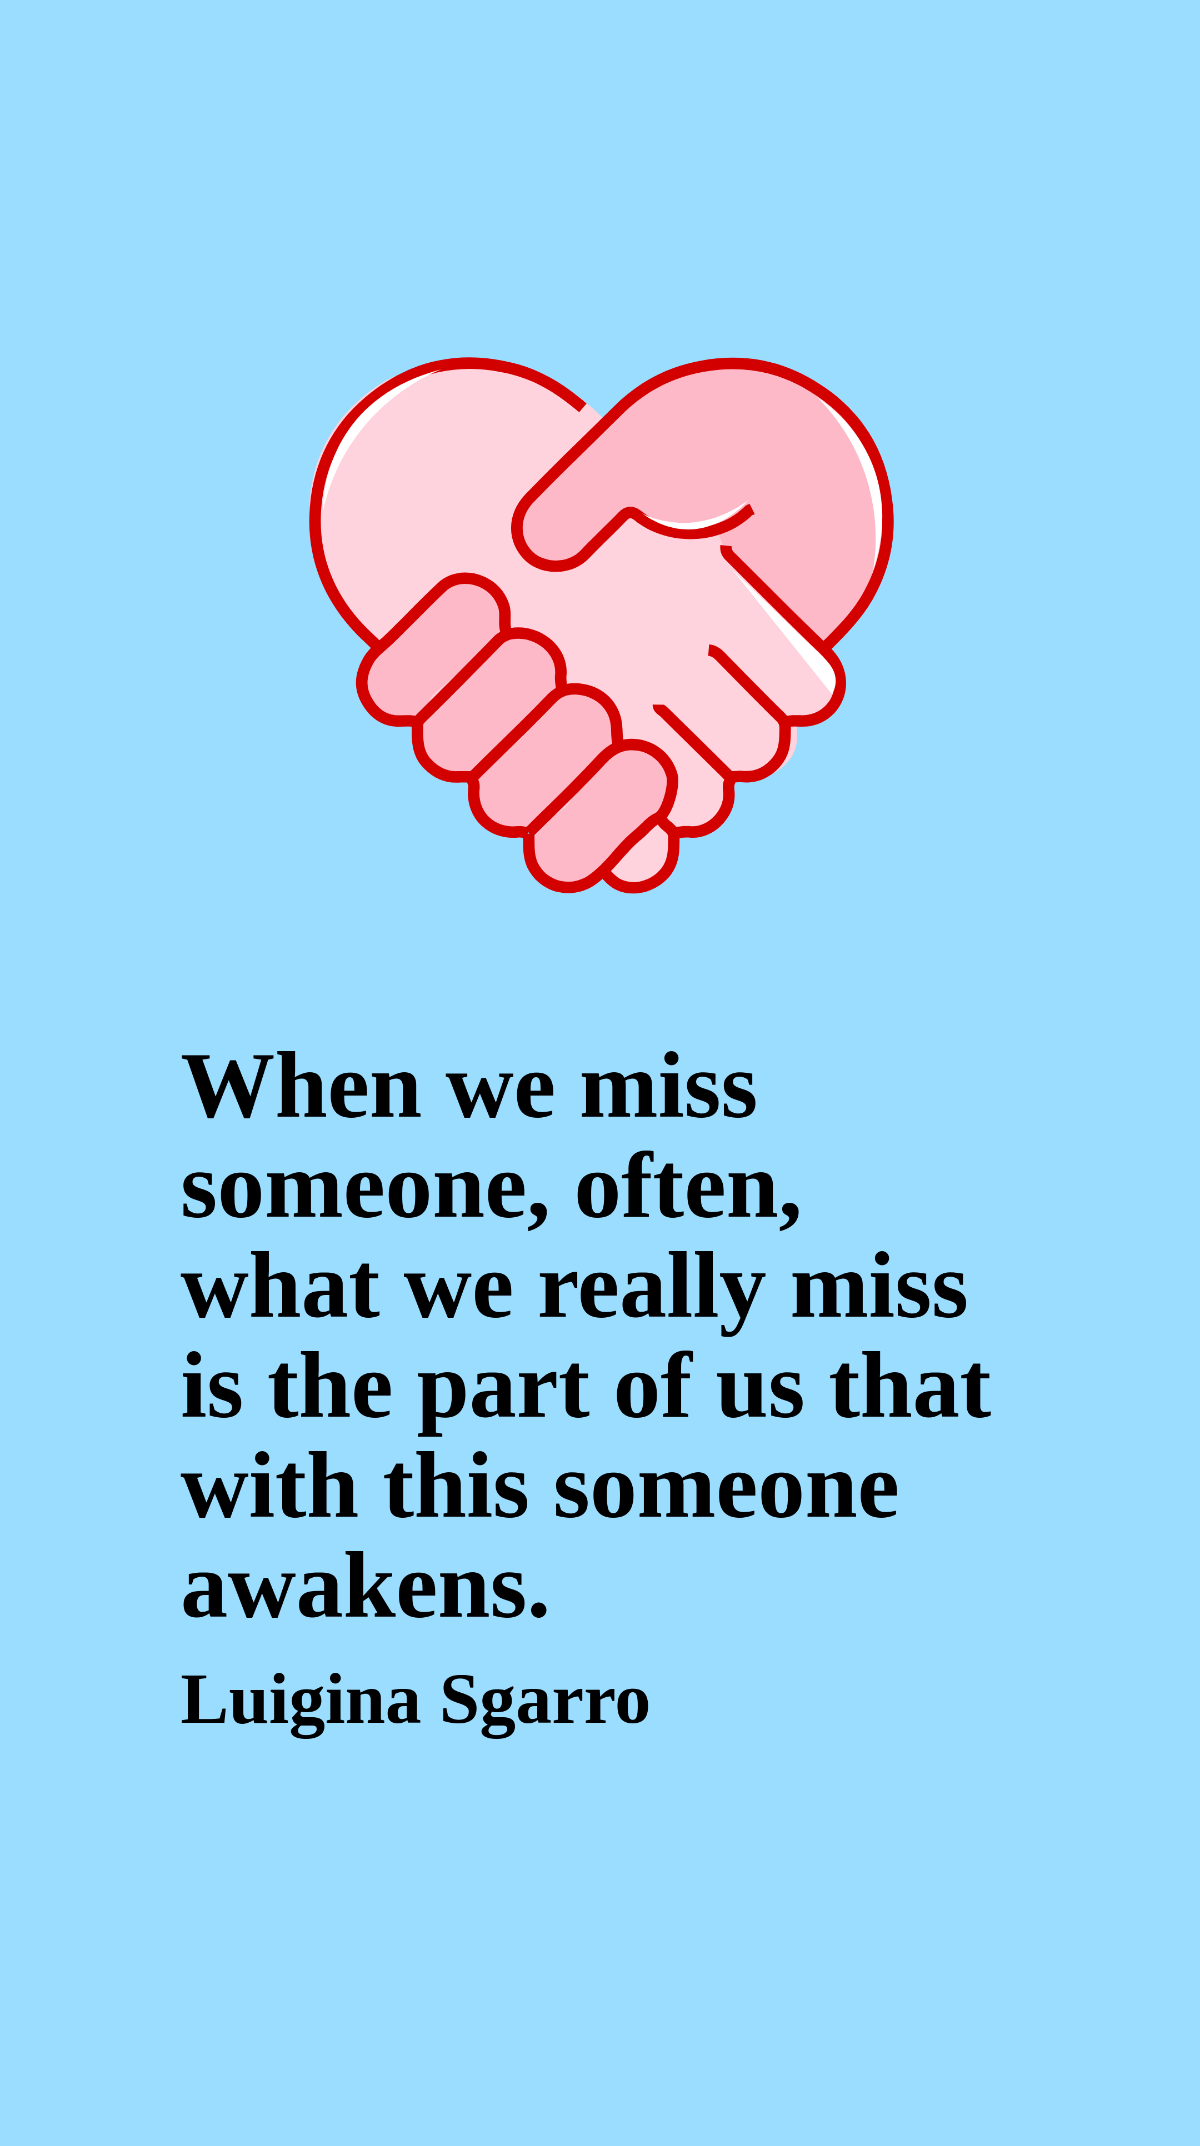 Luigina Sgarro - When we miss someone, often, what we really miss is the part of us that with this someone awakens.